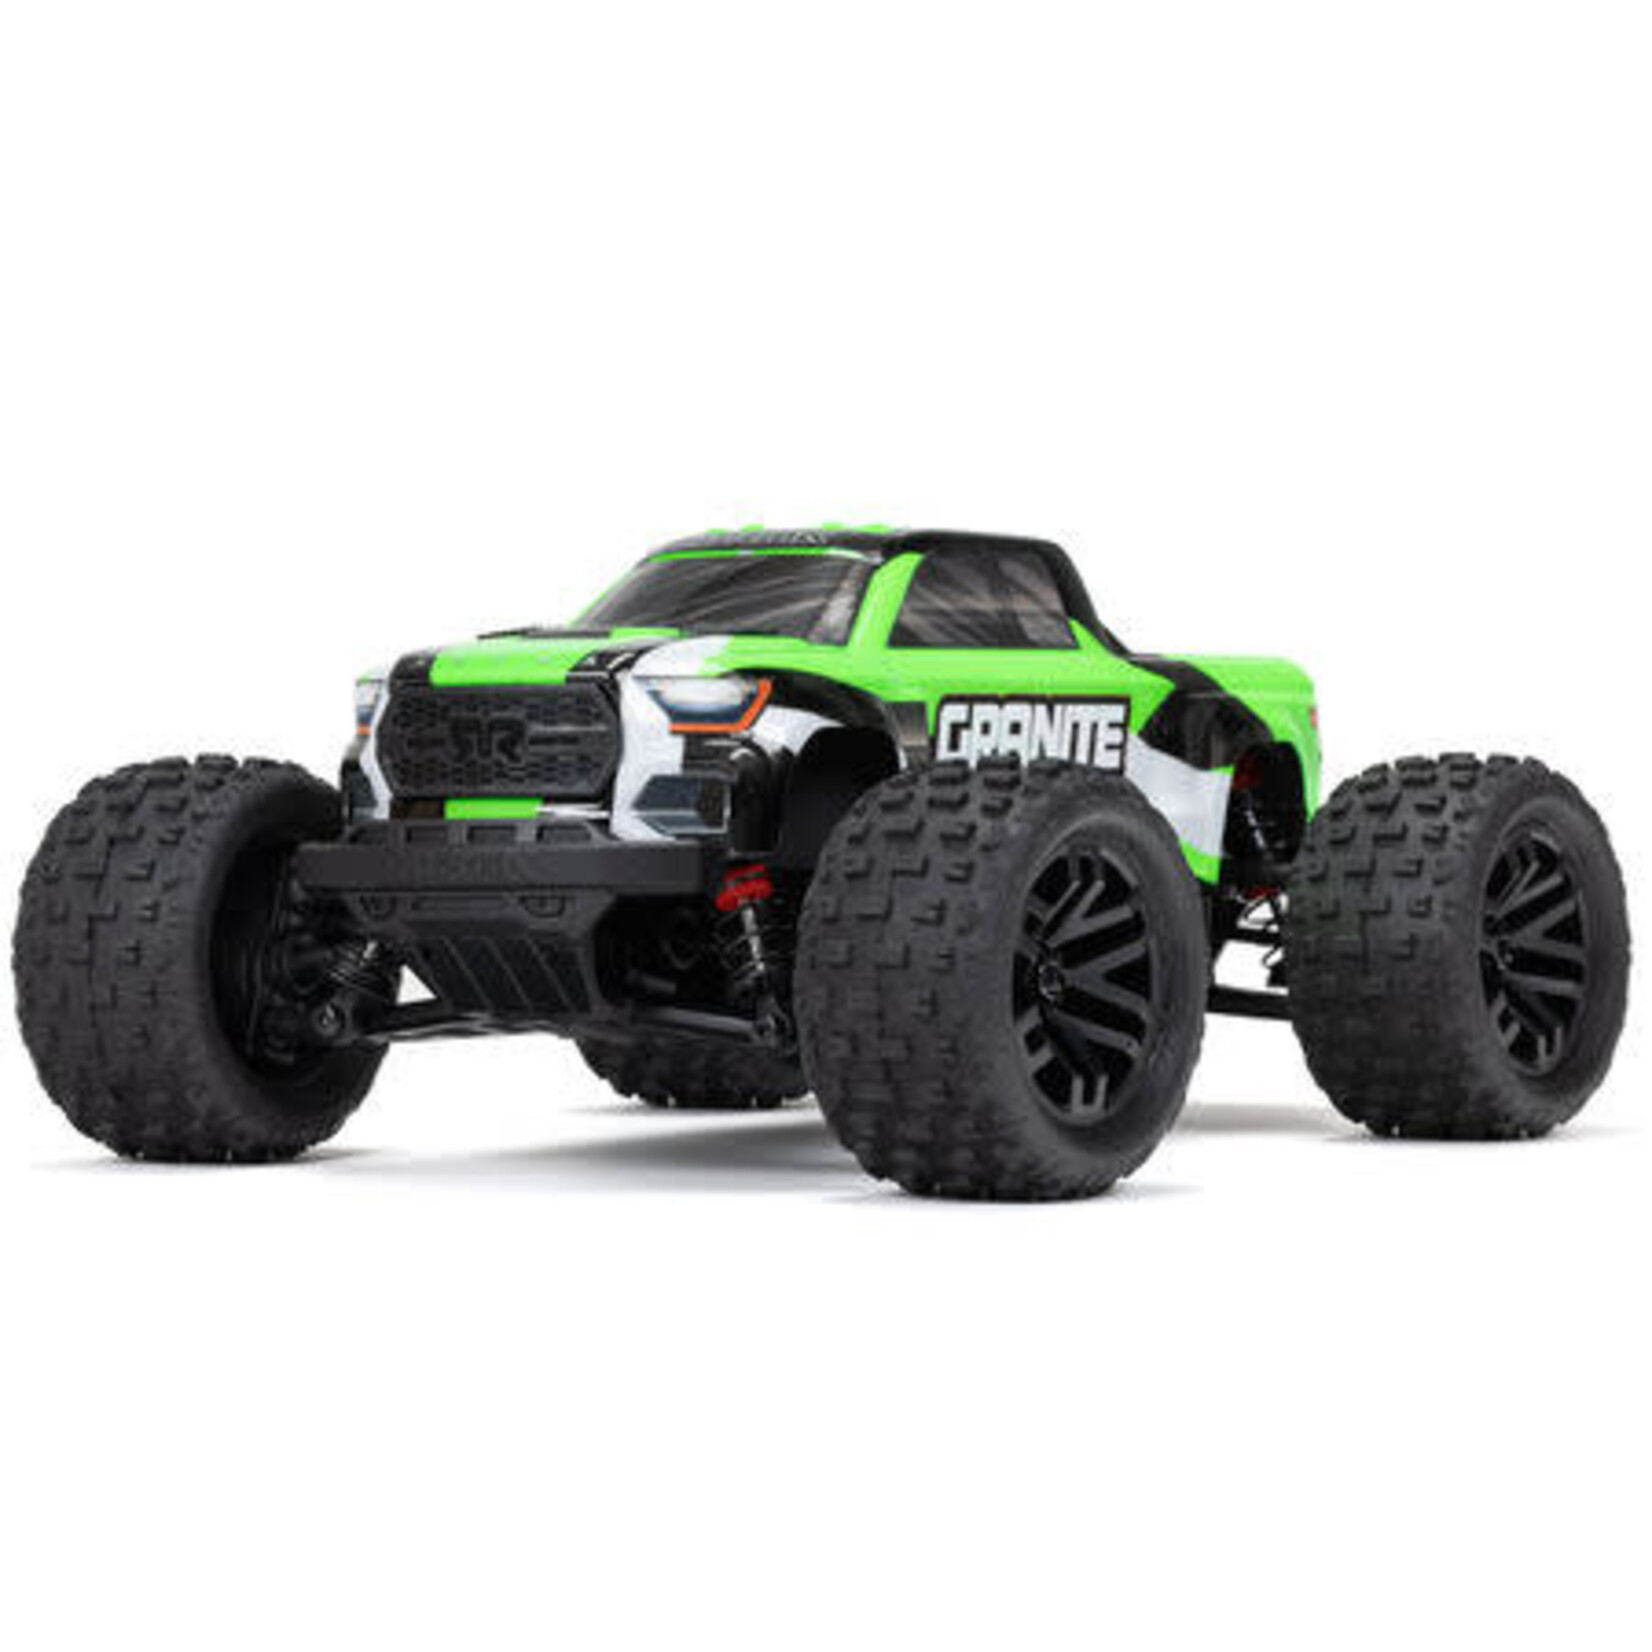 ARRMA ARA2102T3  1/18 GRANITE GROM MEGA 380 Brushed 4X4 Monster Truck RTR with Battery & Charger, Green